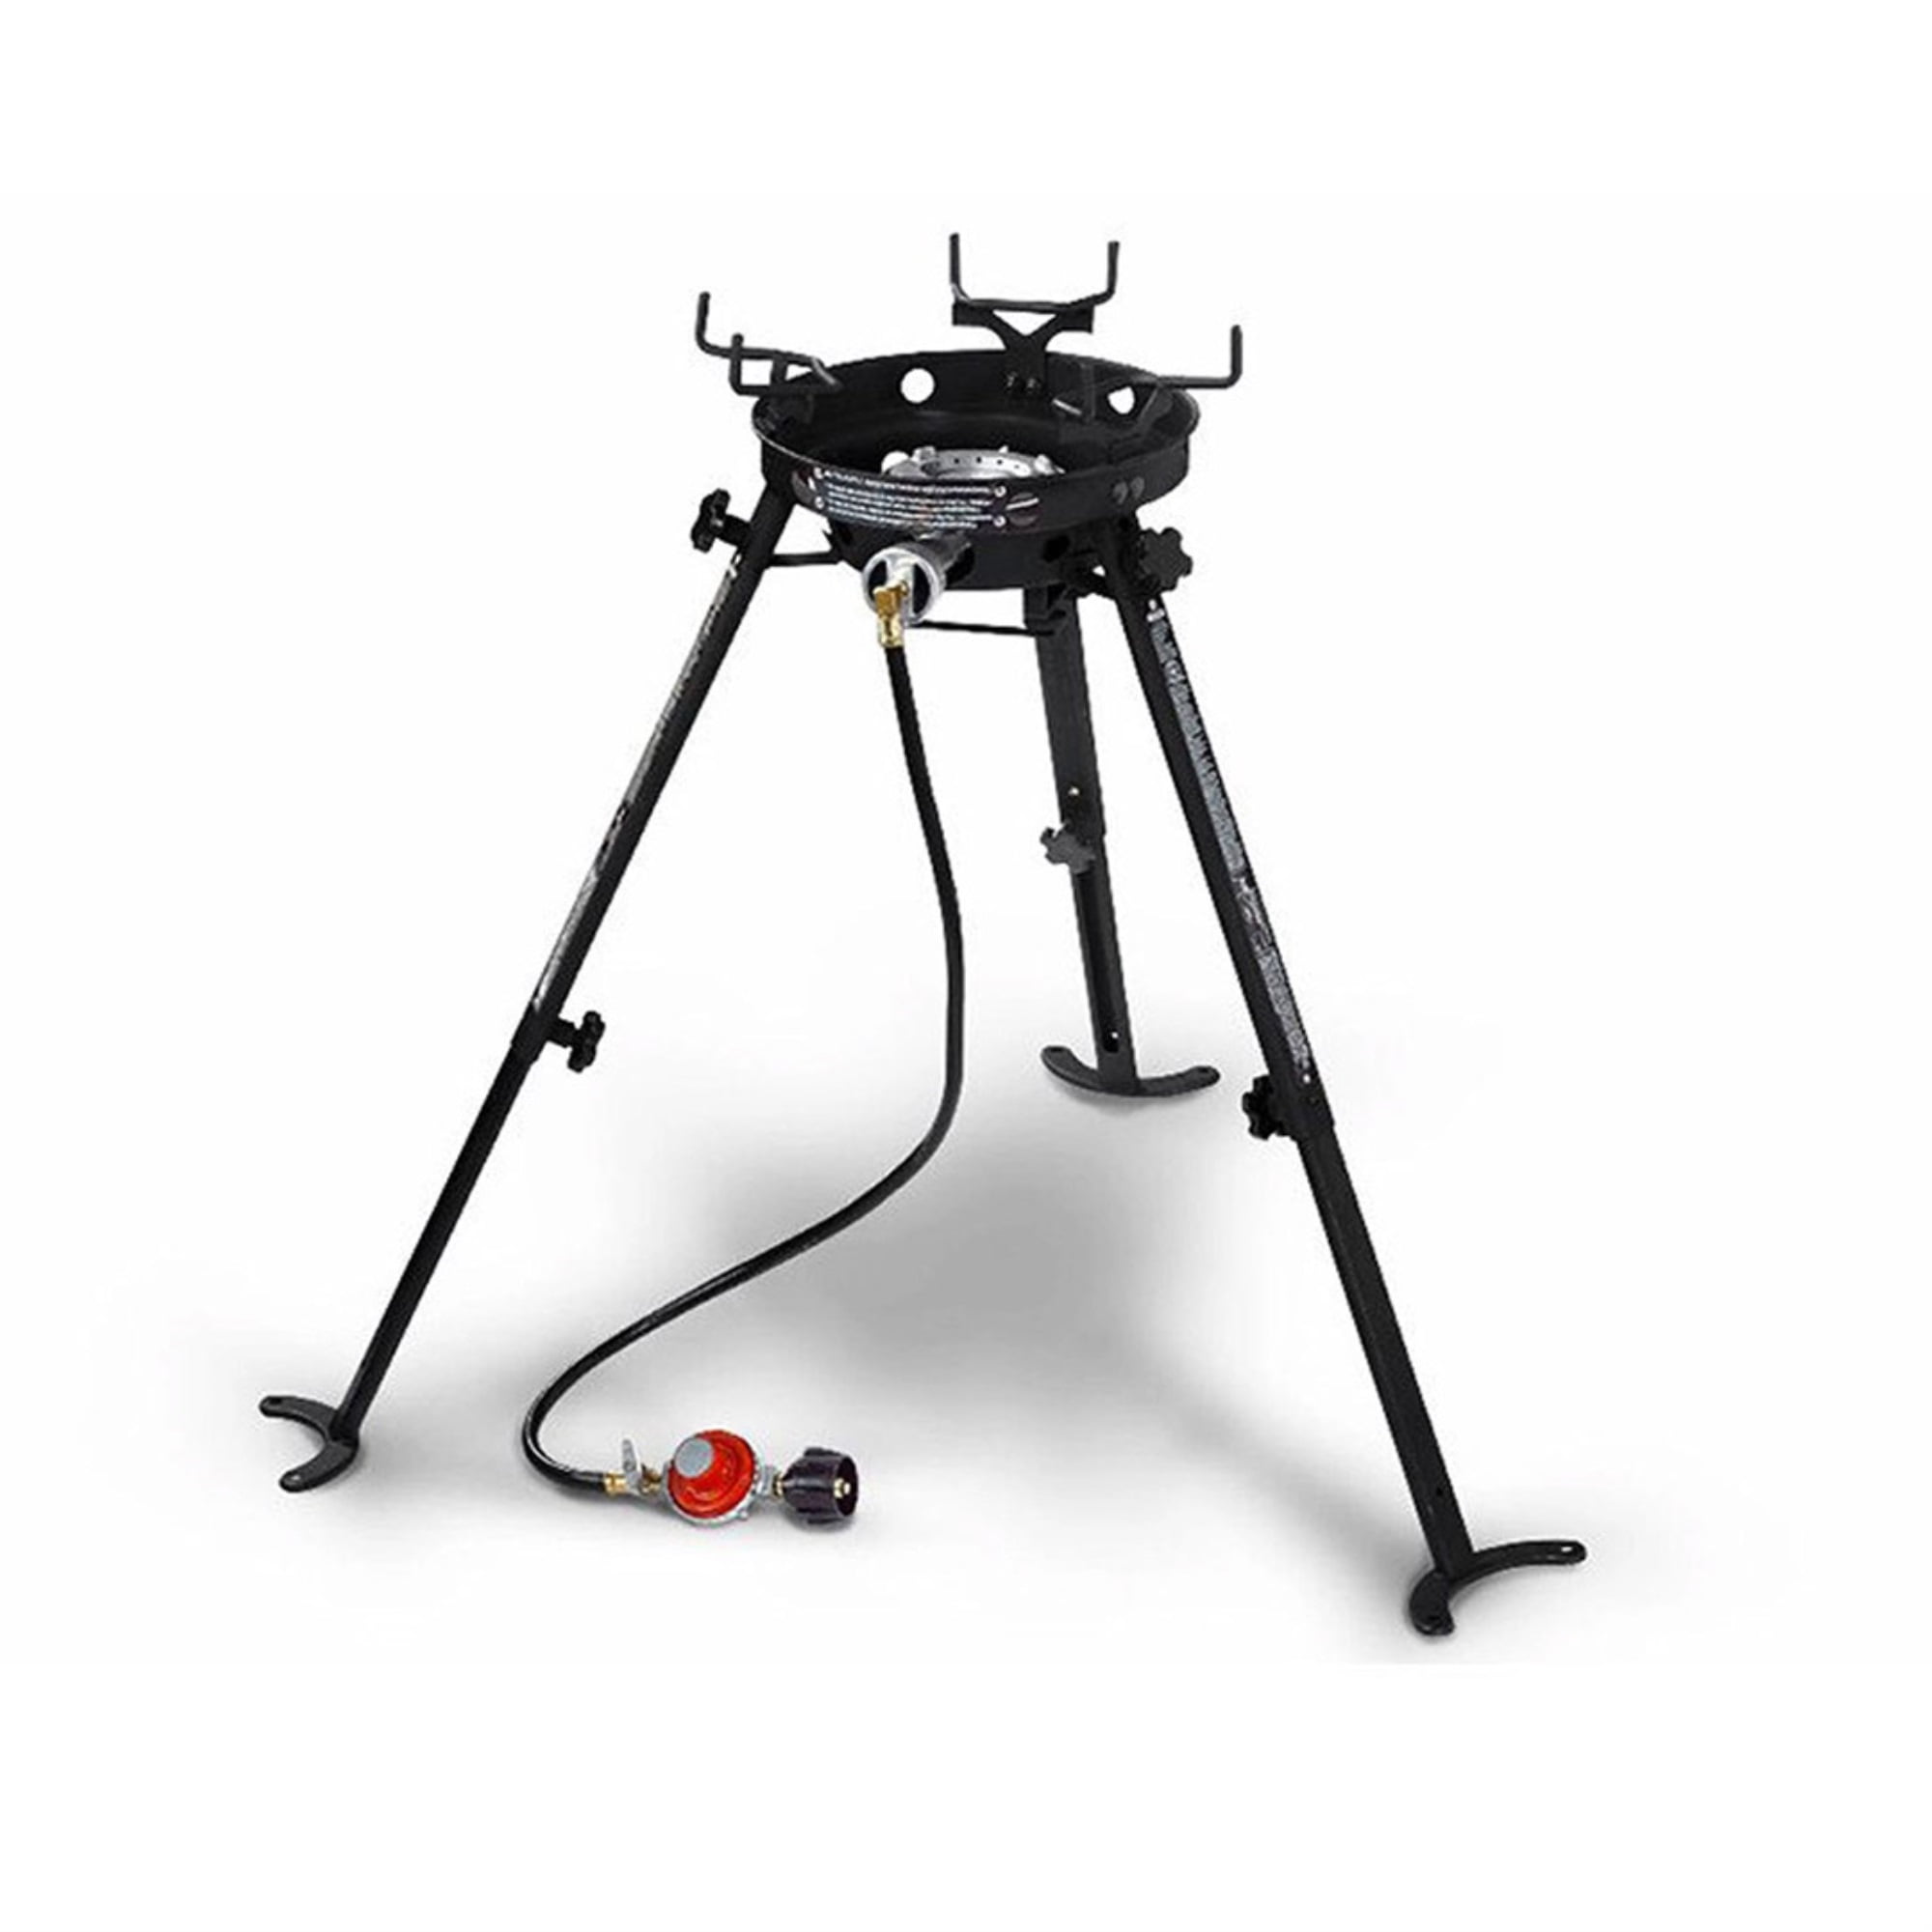 Pack of 3 Eastman Outdoors Portable Kahuna Burner with XL Pot and Wok Brackets with Adjustable and Removable Legs